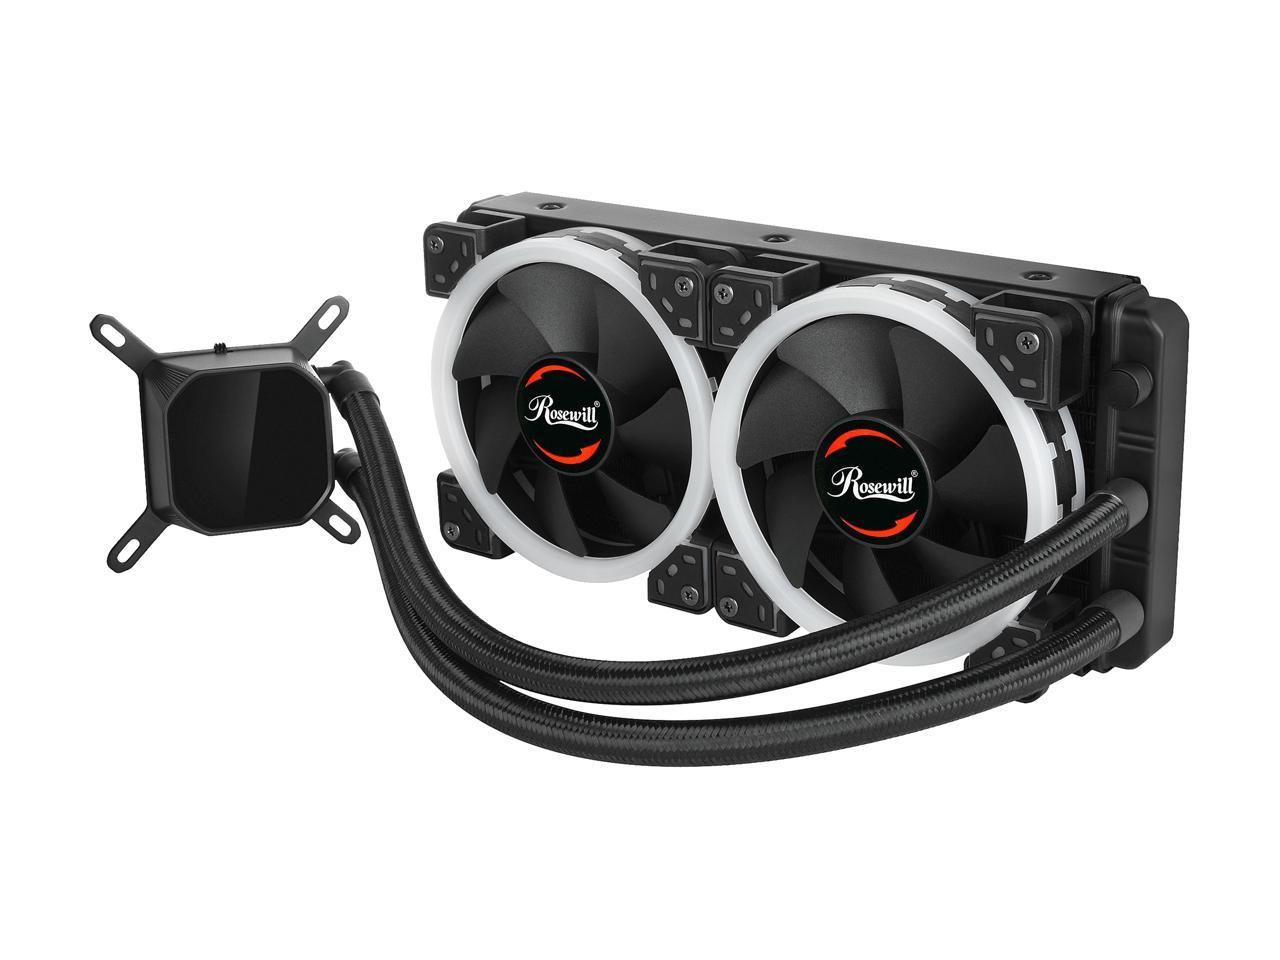 Rosewill RGB AIO 240mm CPU Liquid Cooler, Closed Loop PC Water Cooling